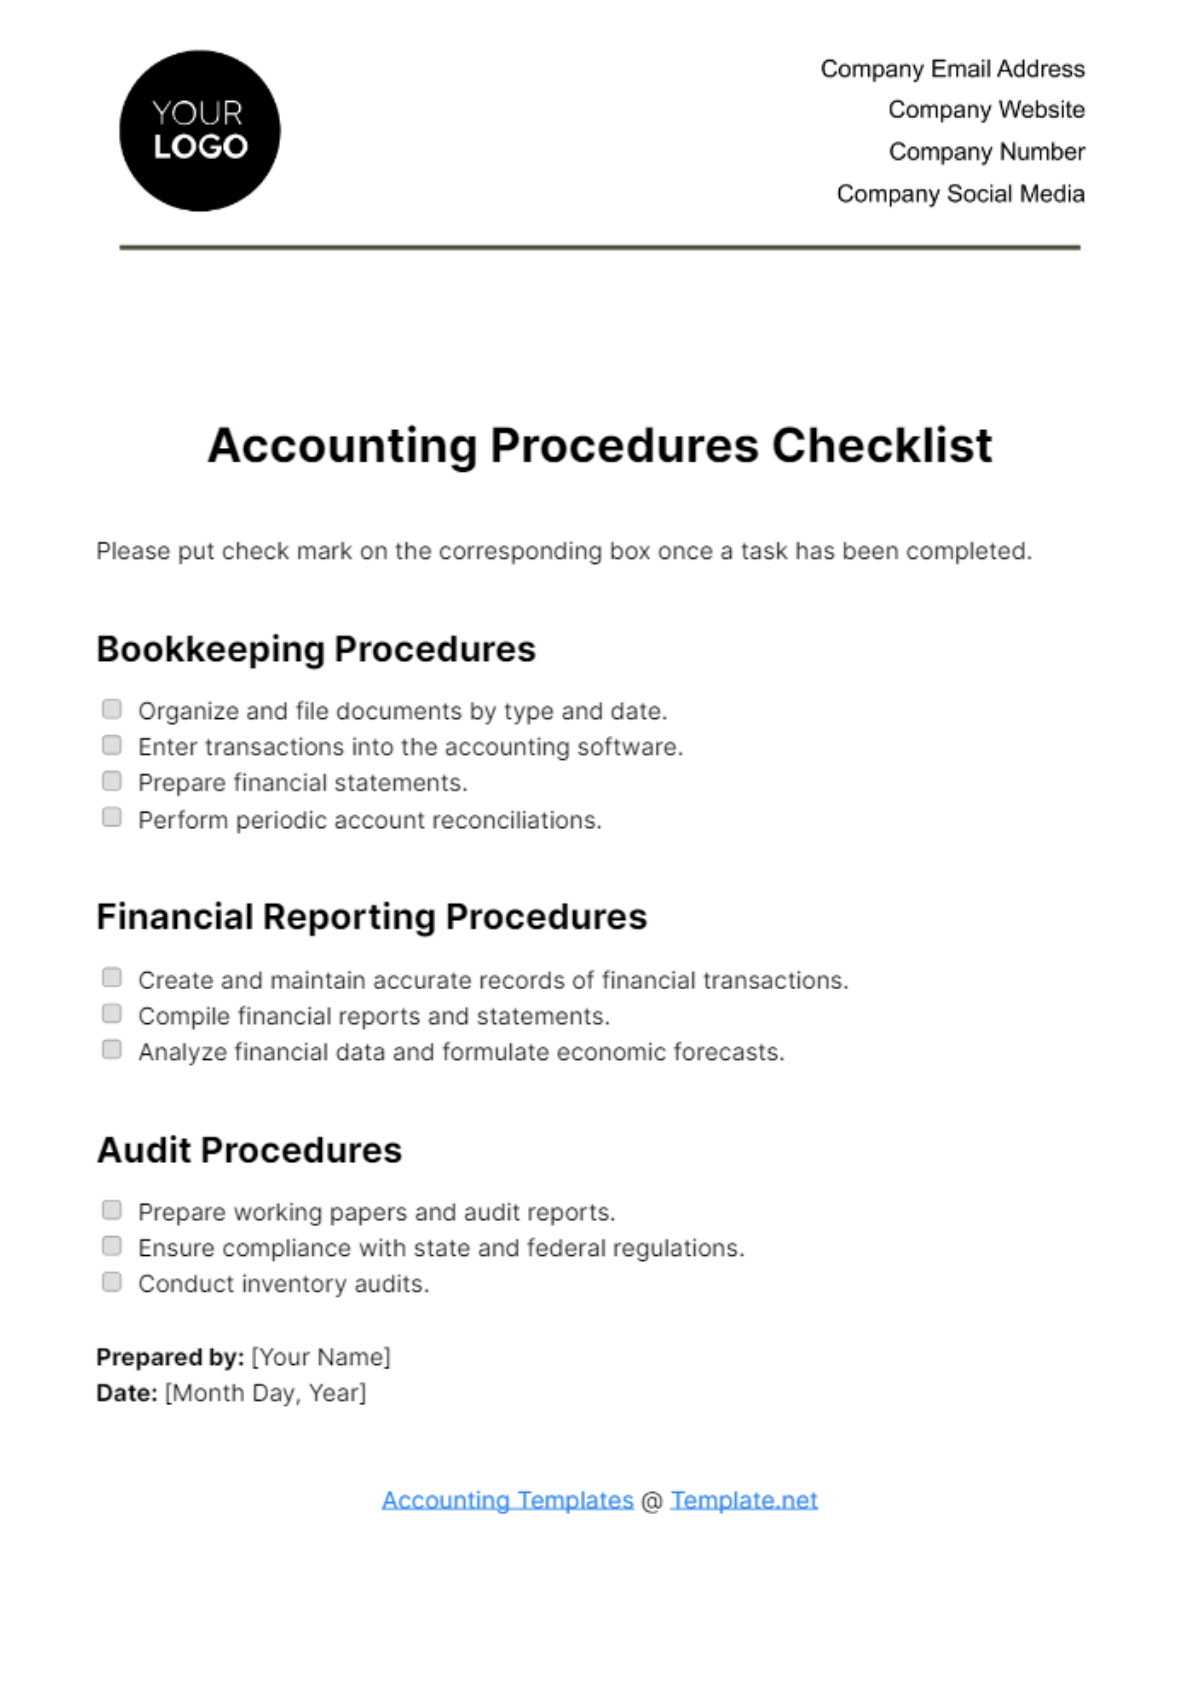 Free Accounting Procedures Checklist Template